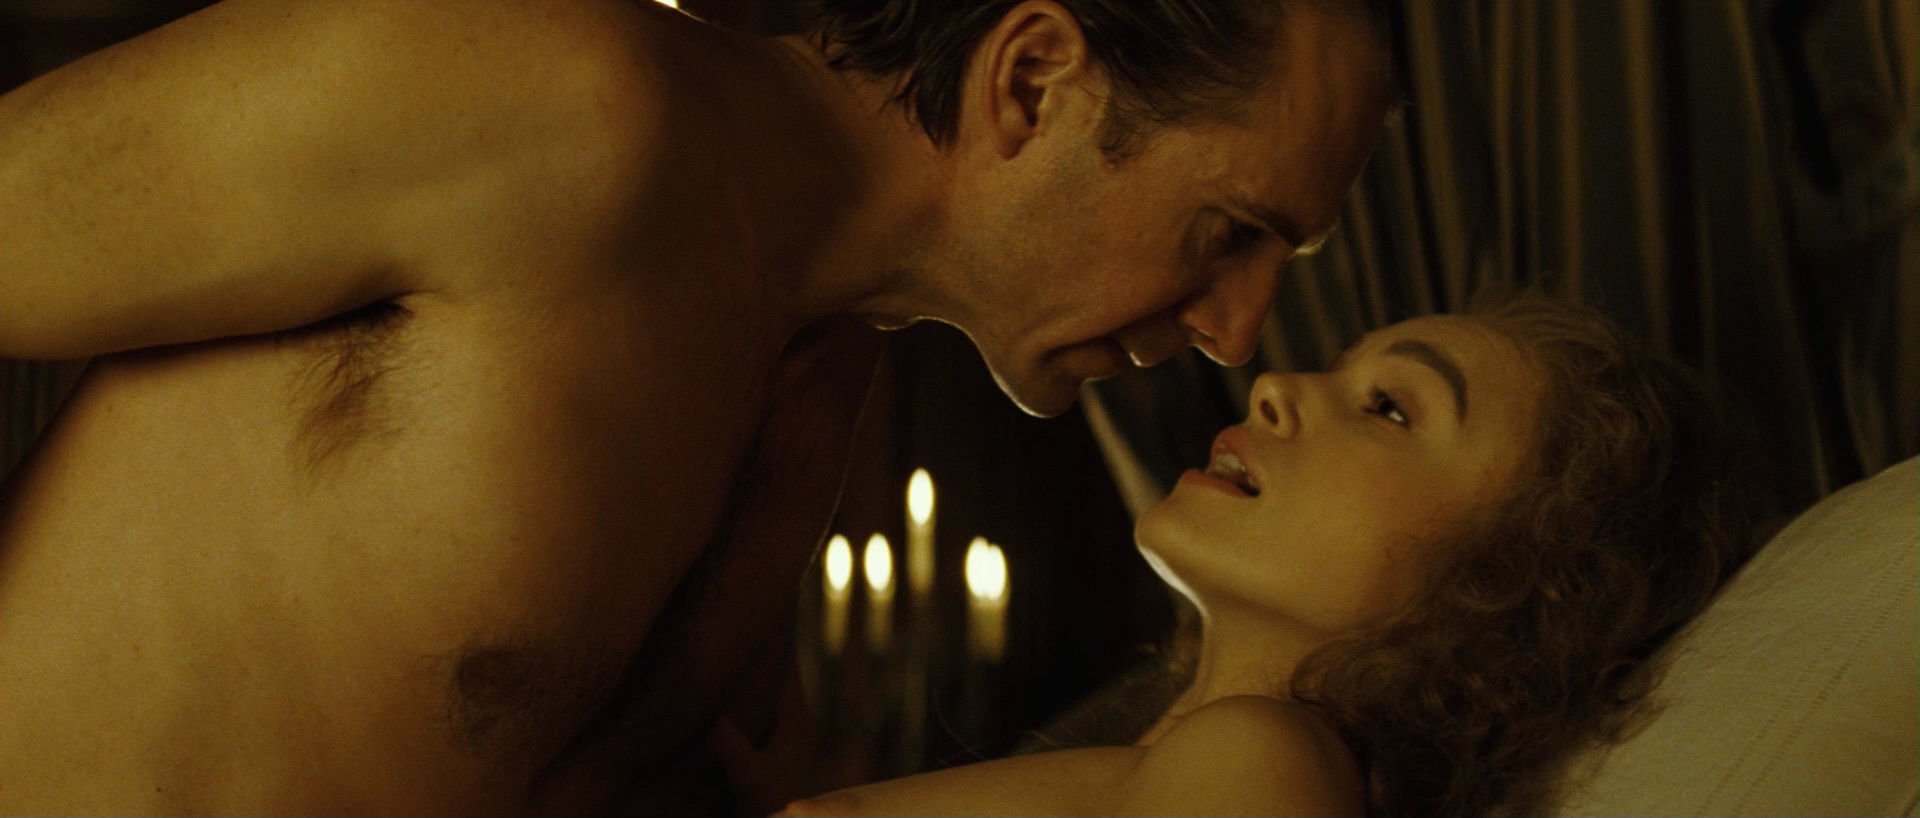 Keira Knightley Nude The Duchess 6 Pics And Video Thefappening